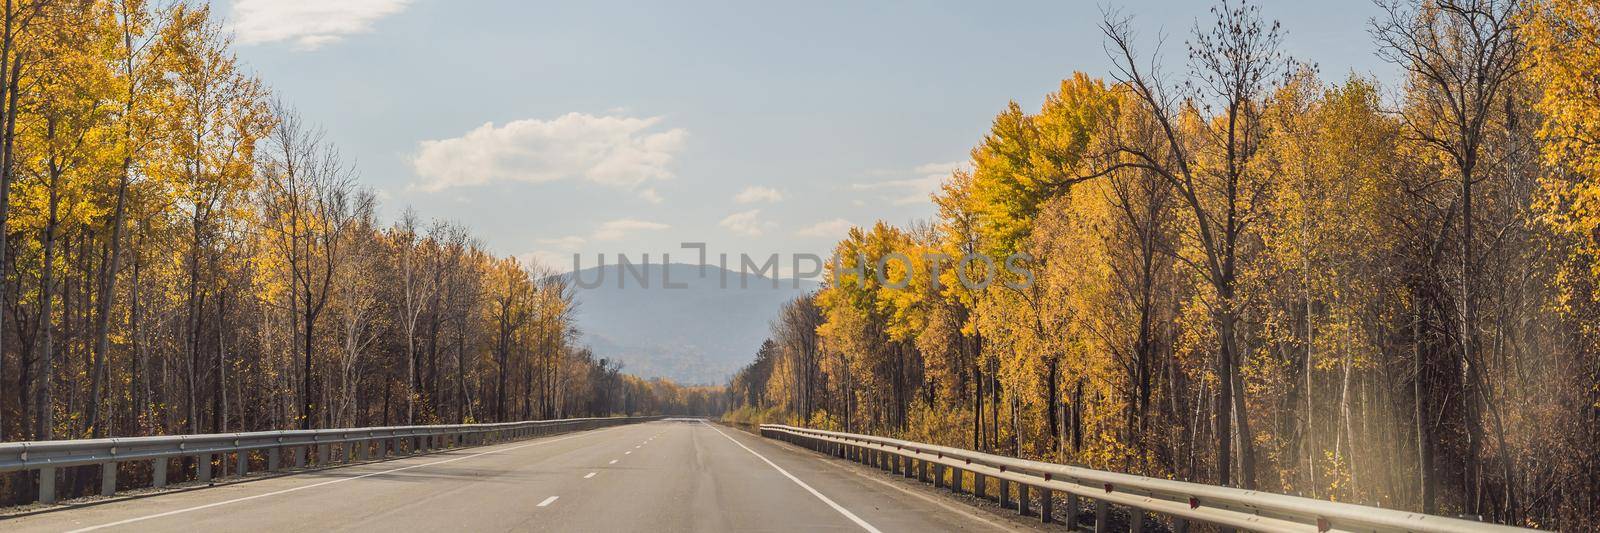 BANNER, LONG FORMAT Amazing view with colorful autumn forest with asphalt mountain road. Beautiful landscape with empty road, trees and sunlight in in autumn. Travel background. Nature by galitskaya